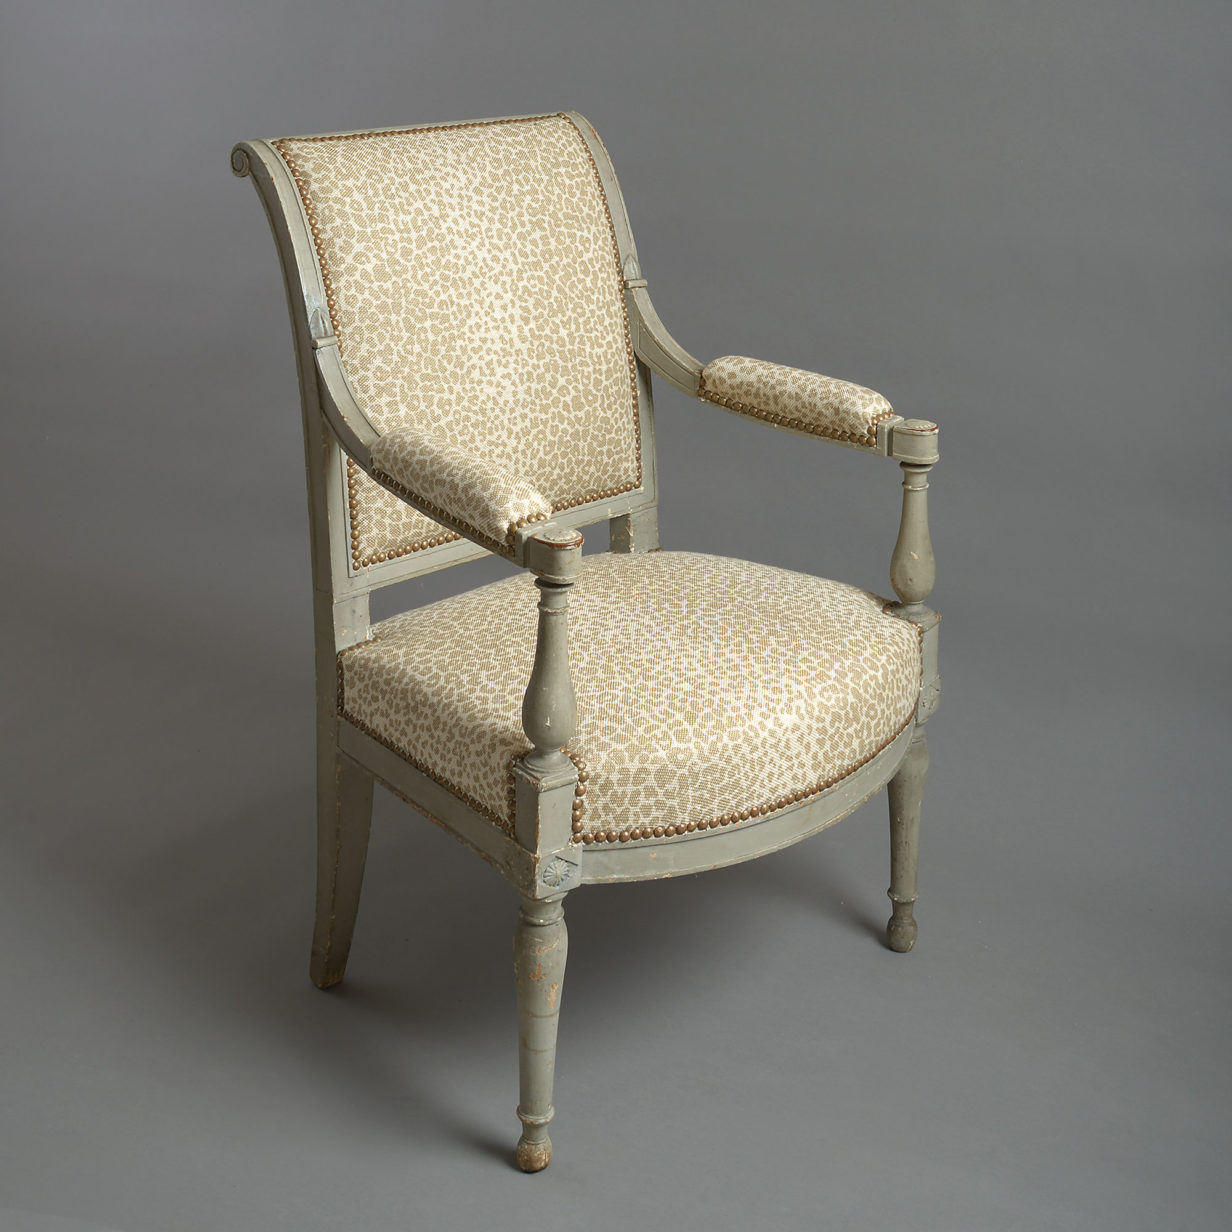 Late 18th century directoire period painted fauteuil armchair